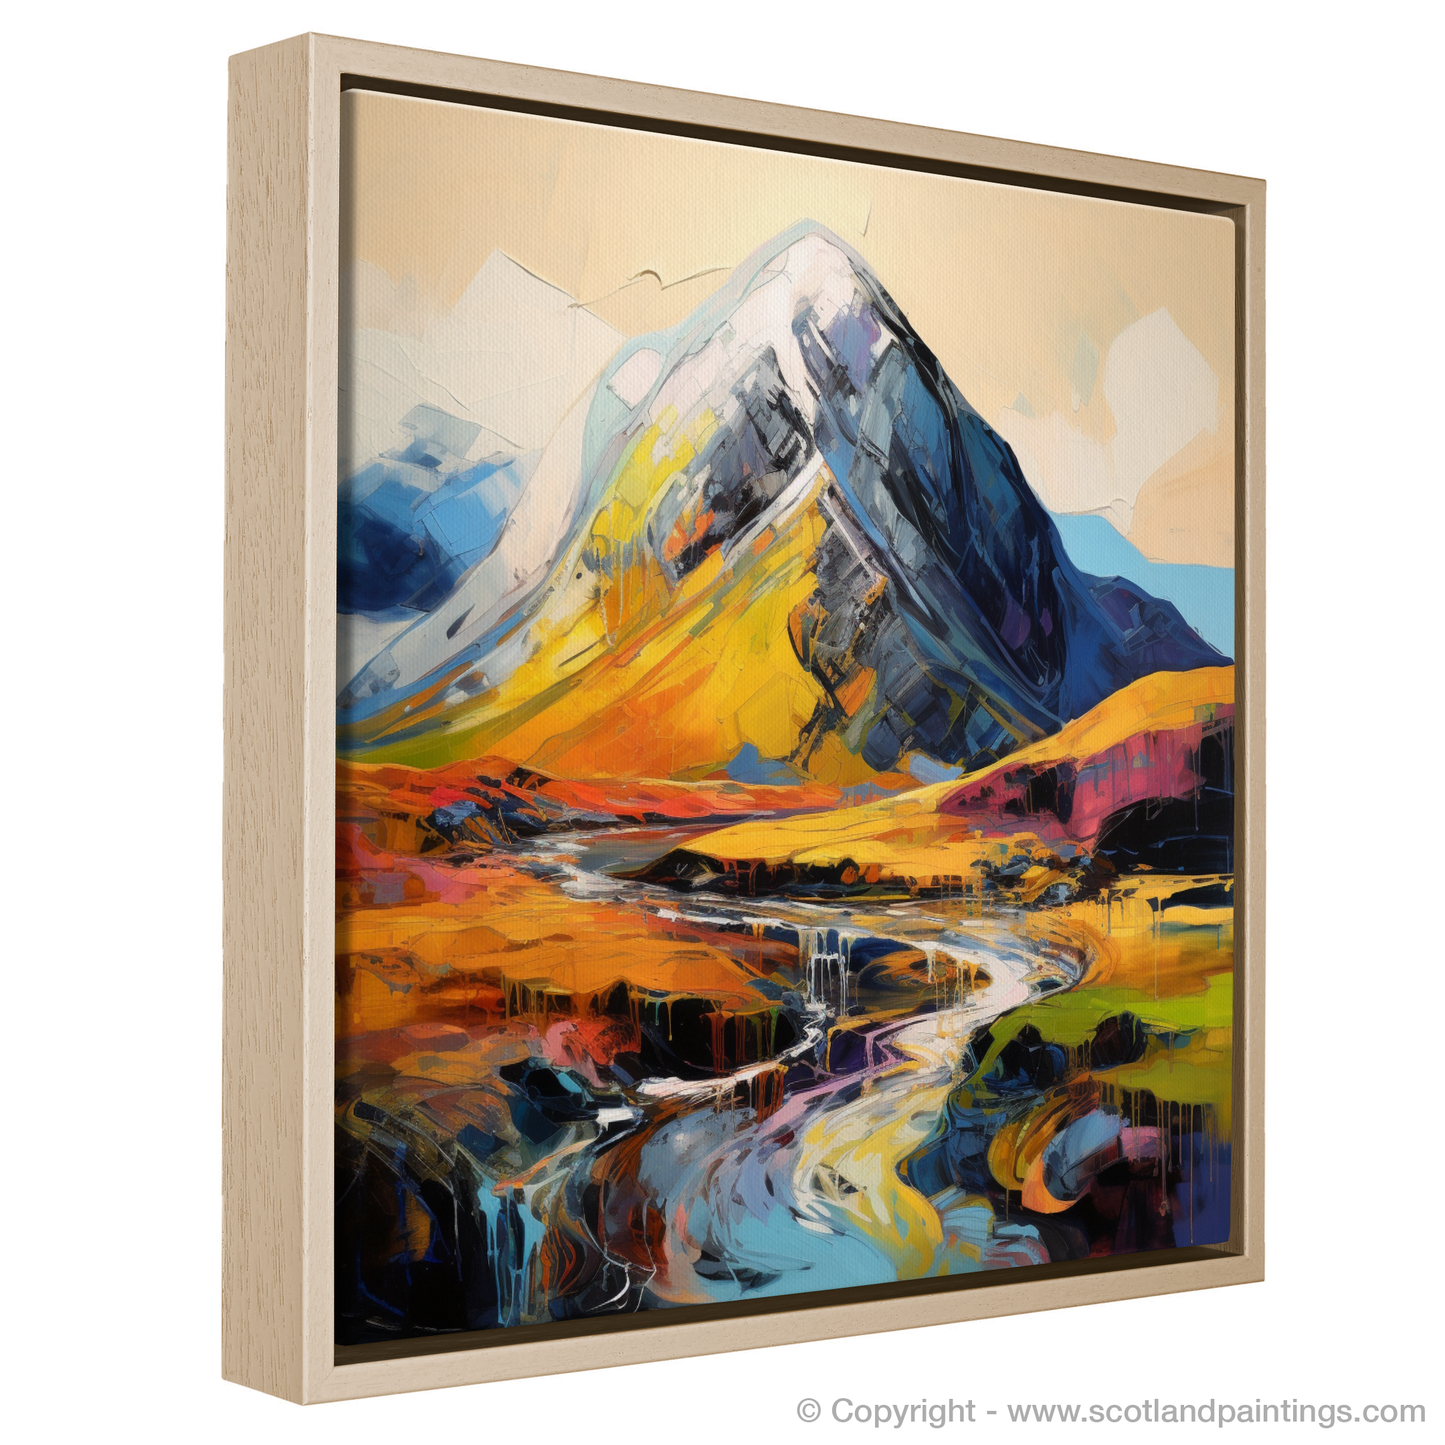 Painting and Art Print of Stob Coire Raineach (Buachaille Etive Beag) entitled "Expressionist Ode to Stob Coire Raineach".